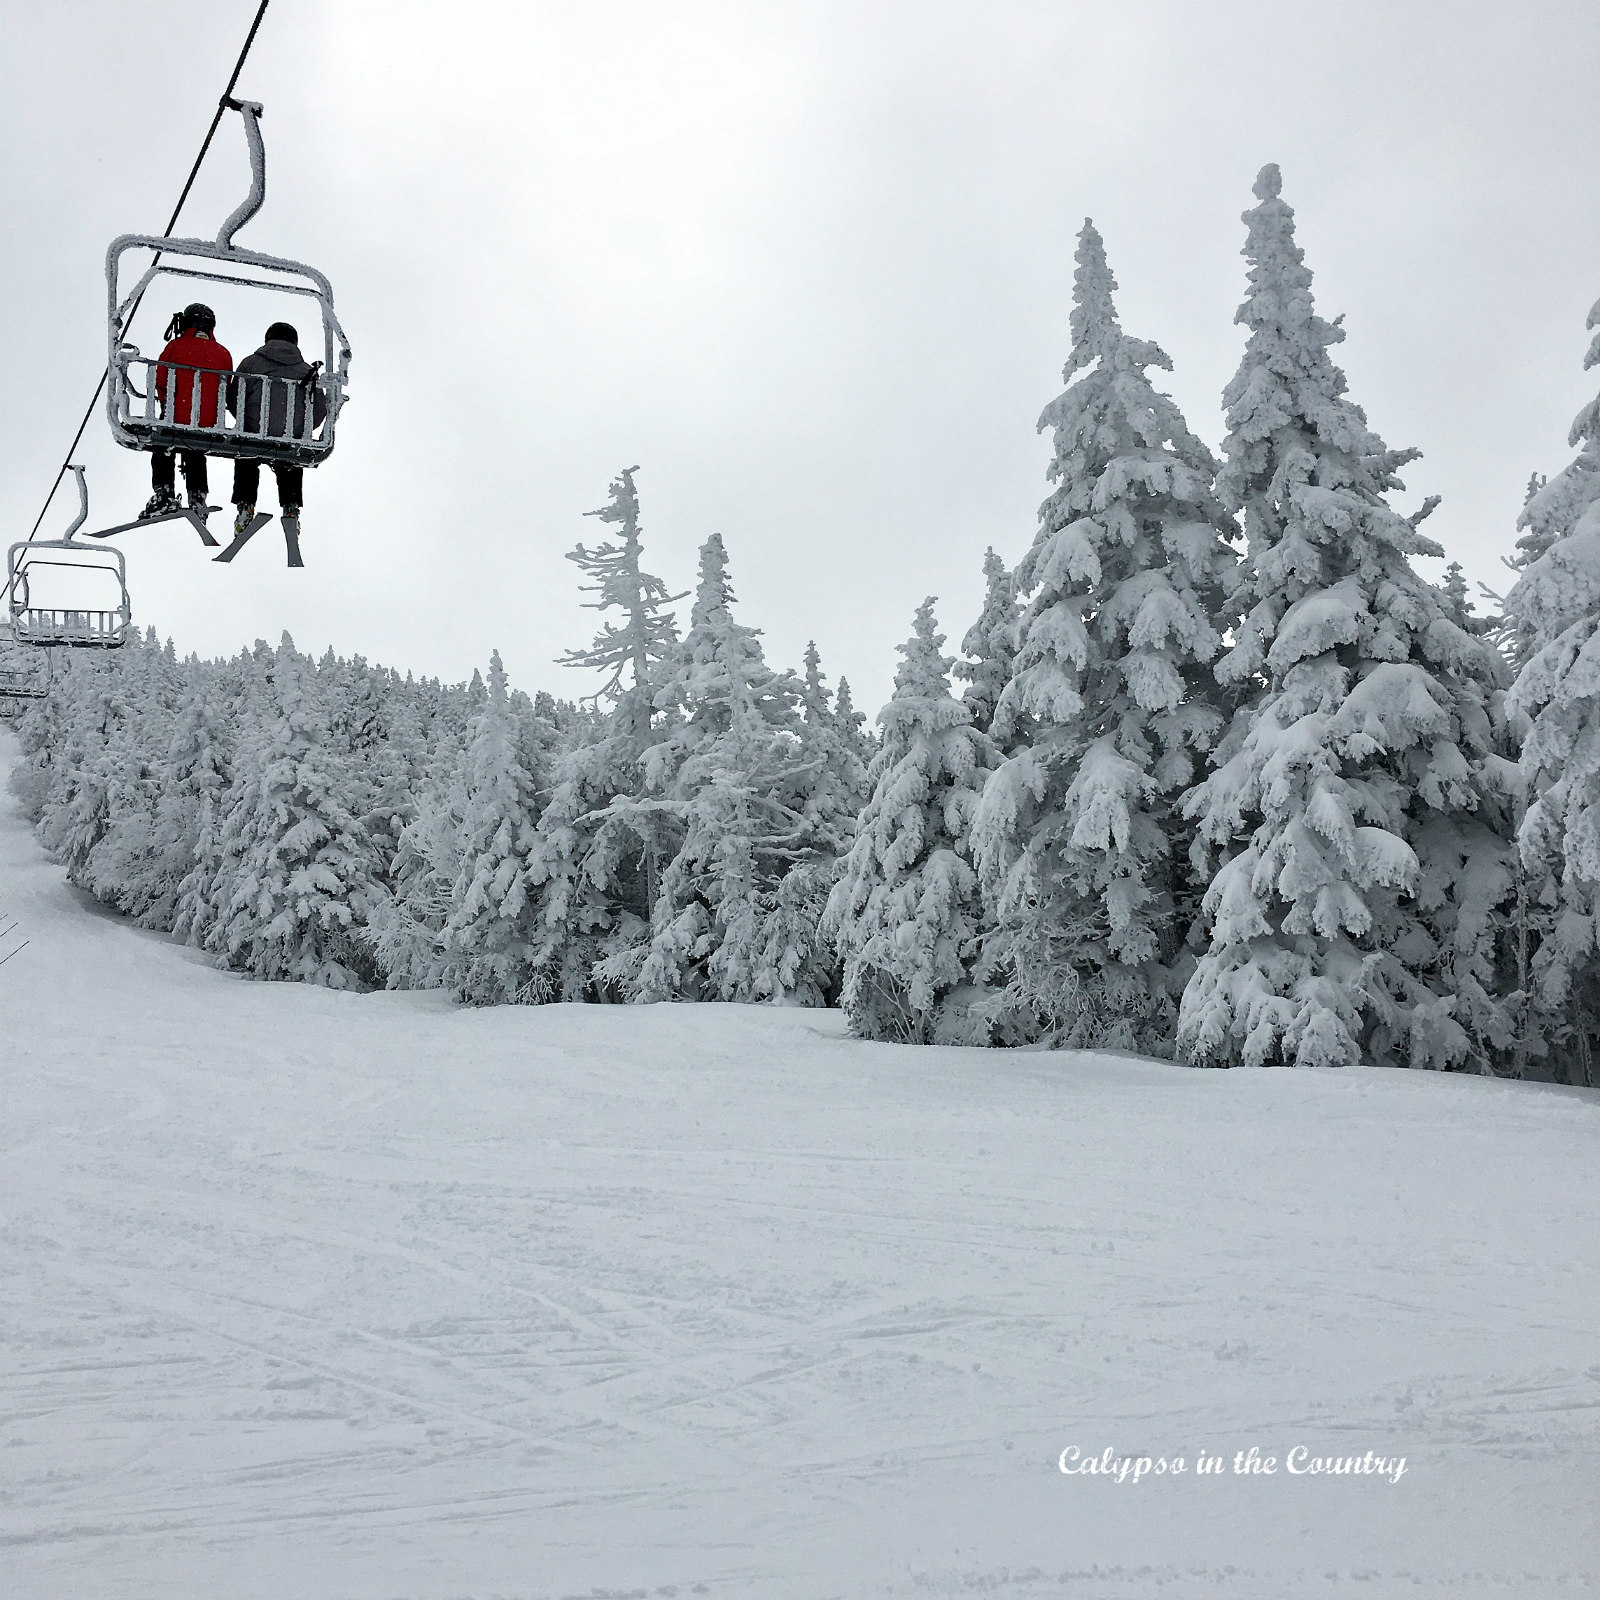 Ski lift and snowy trees